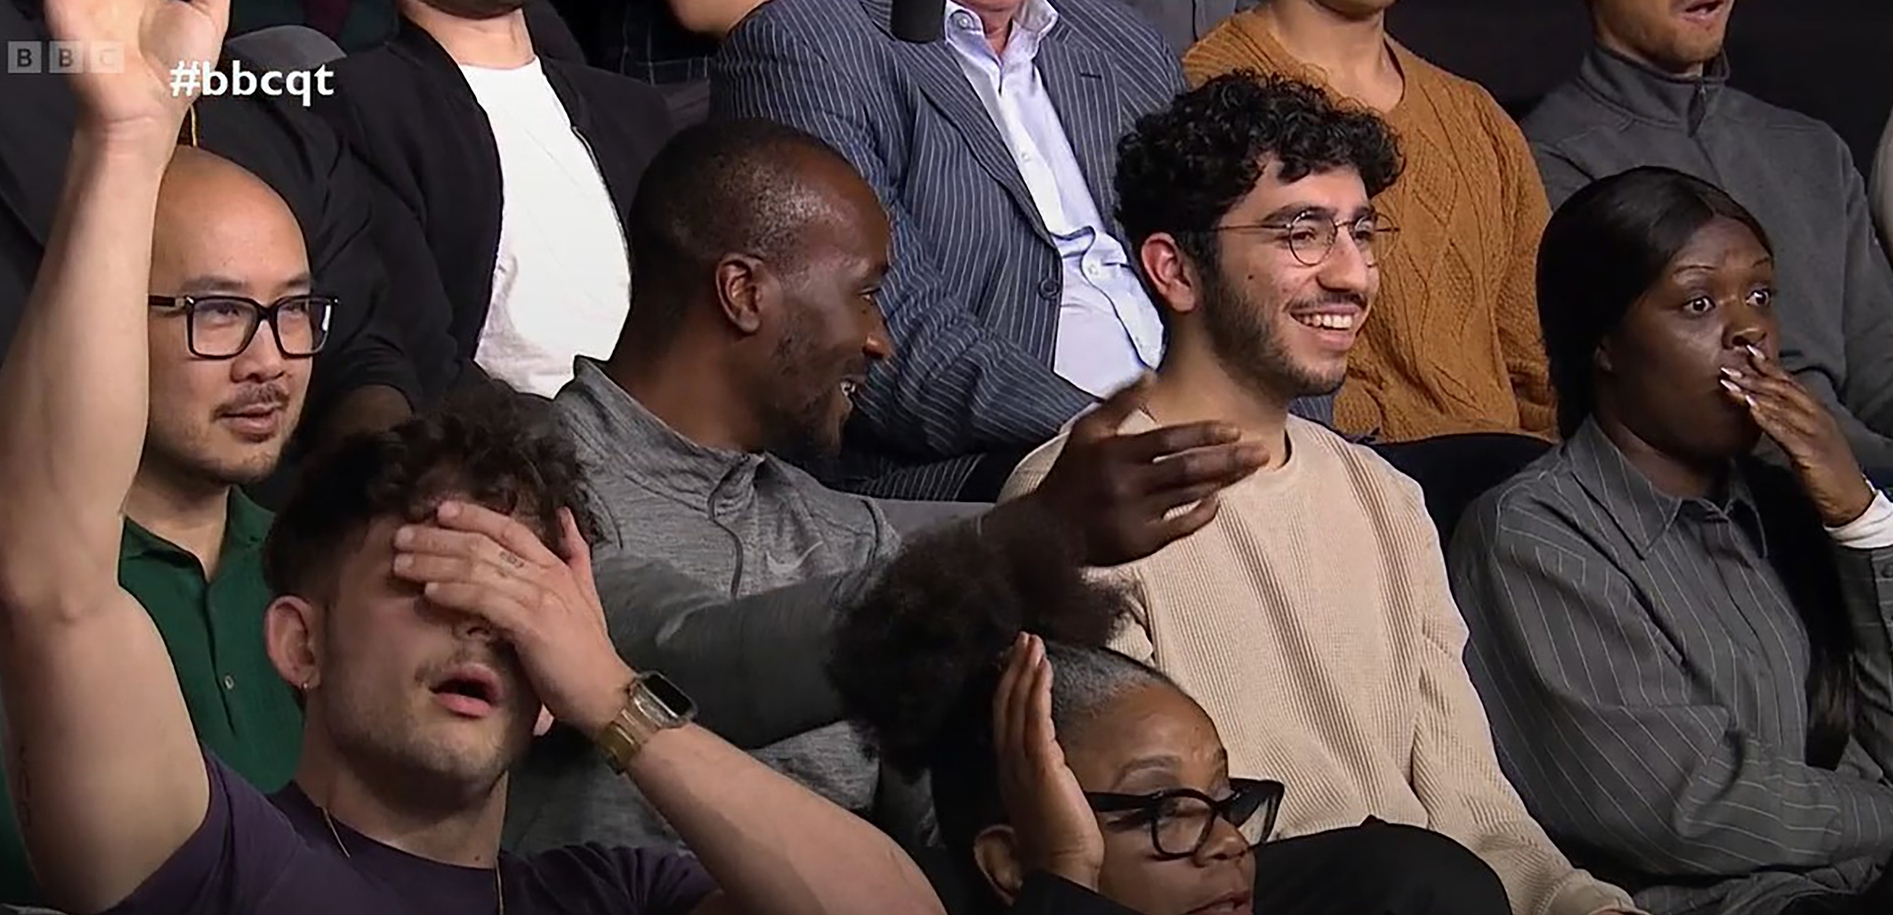 The Question Time crowd ridiculed the politician